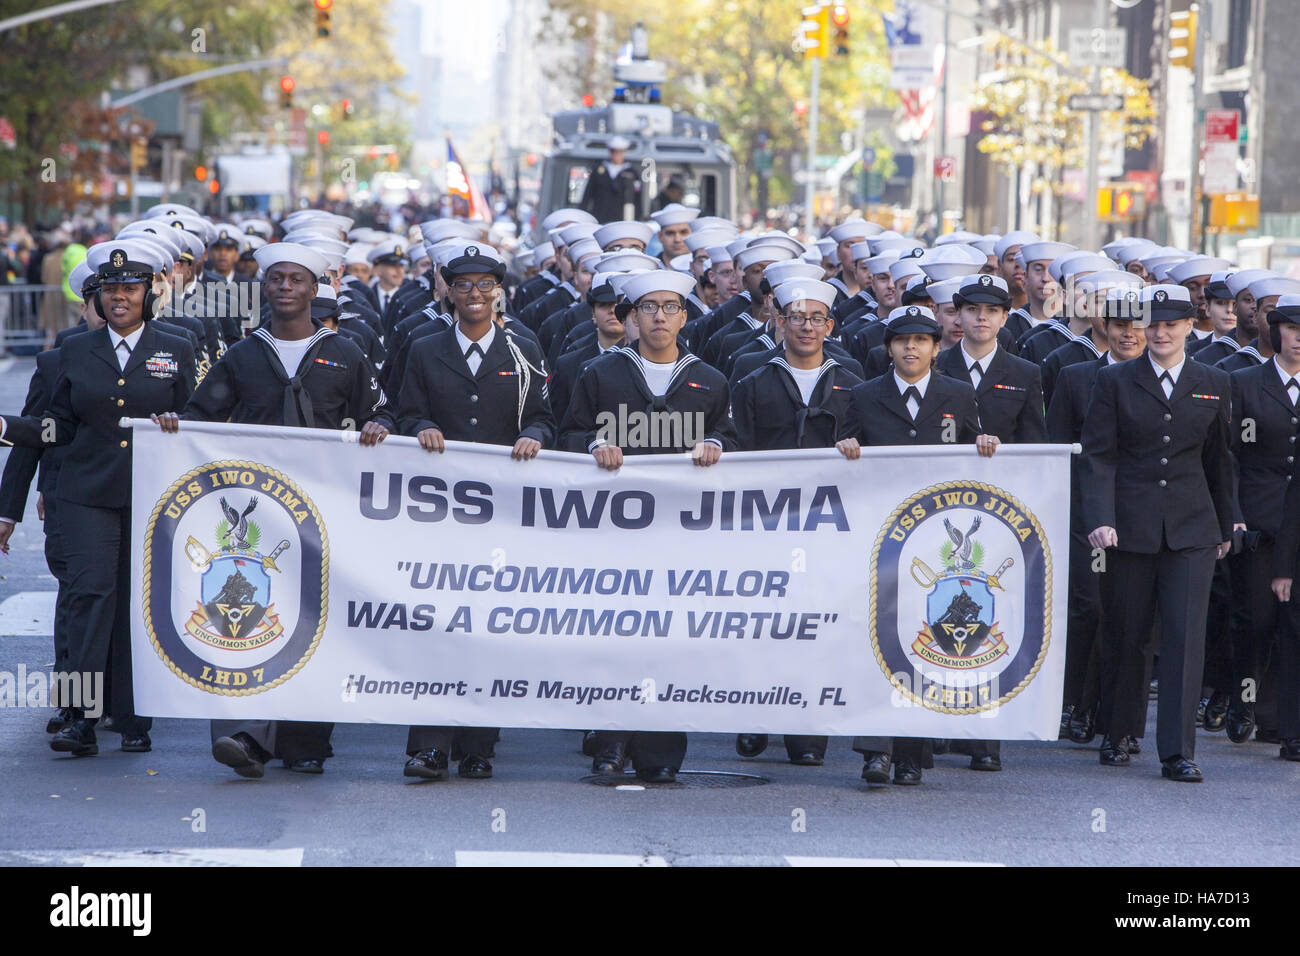 Veterans Day Parade; also known as America's Parade; marches up 5th Avenue in New York City. Navy personnel from the USS IWO JIMA a Wasp-class amphibious assault ship of the United States Navy. Stock Photo